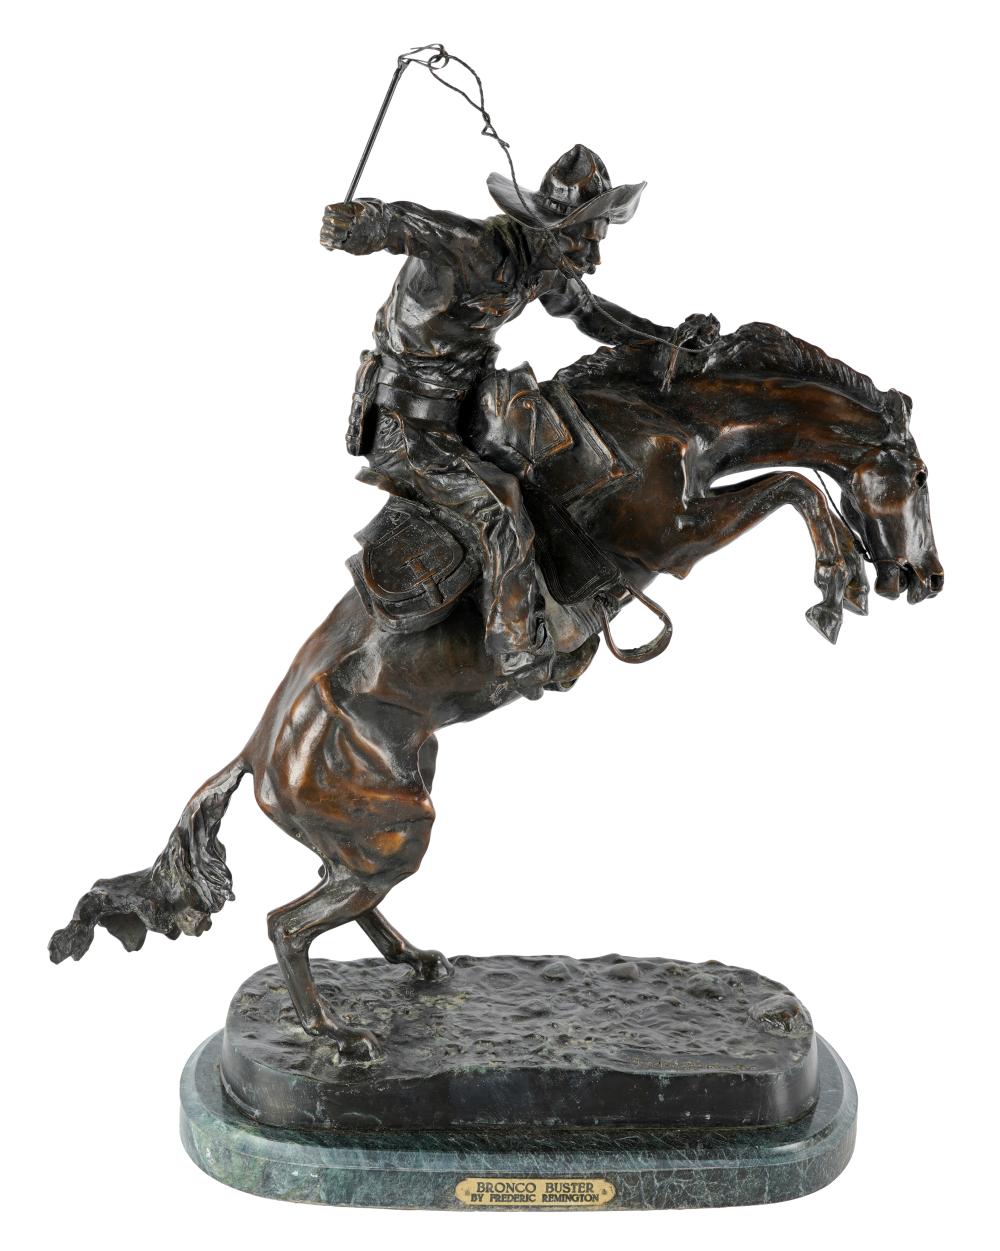 AFTER FREDERIC REMINGTON (1861 - 1909):